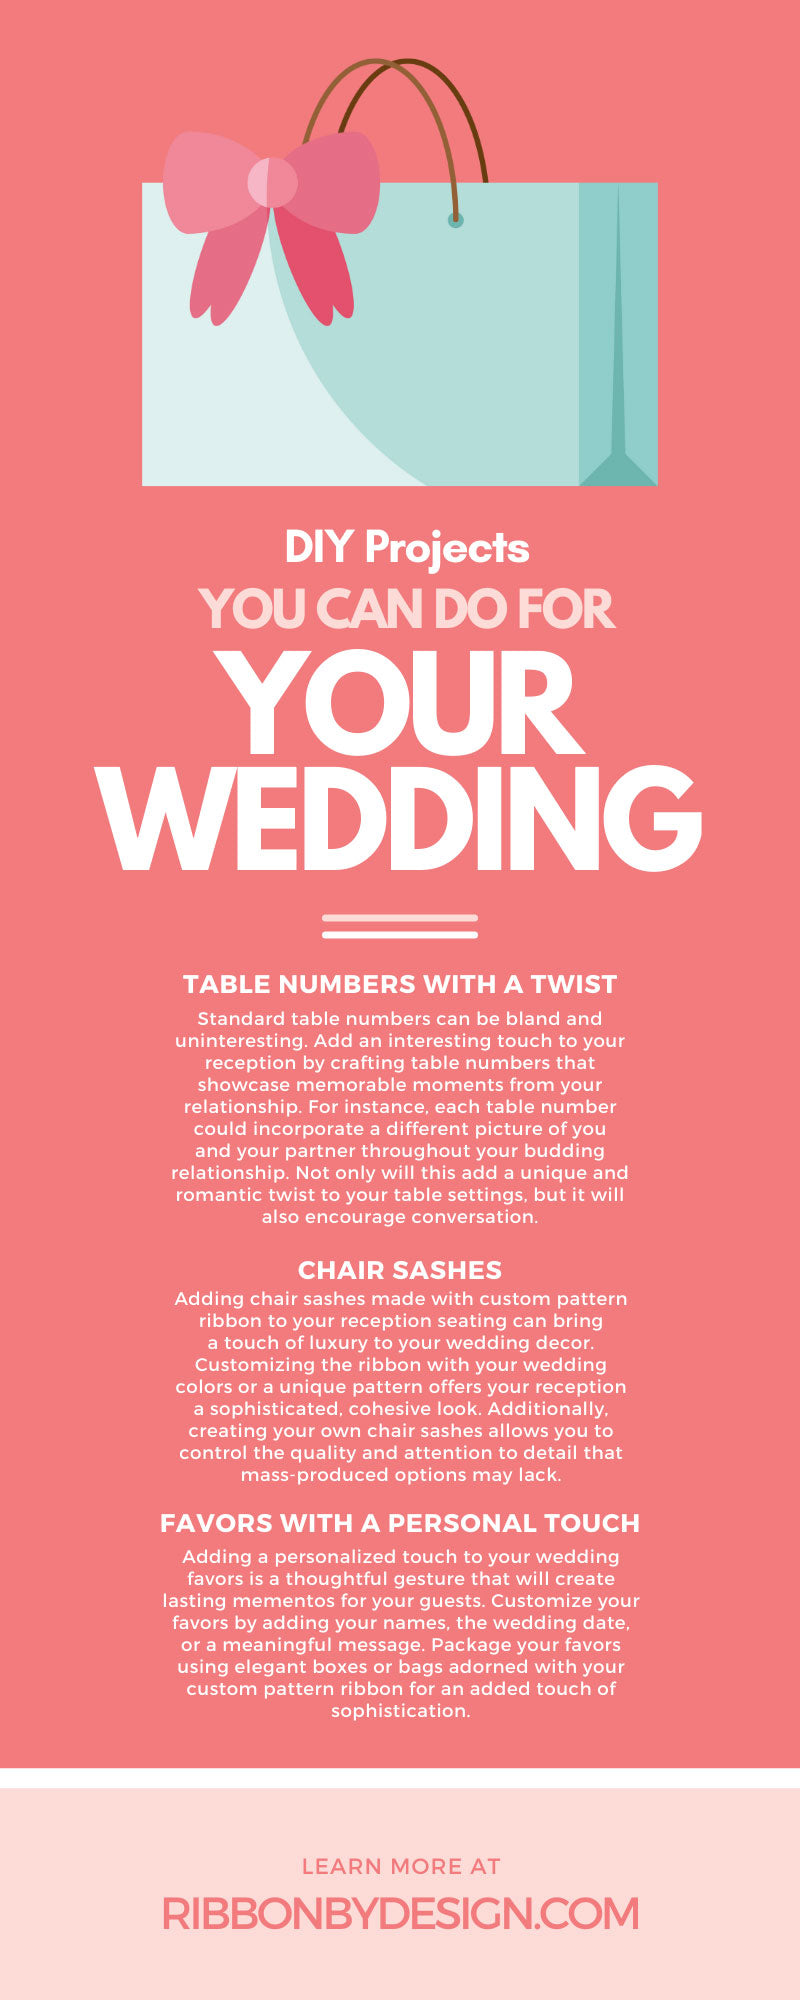 DIY Projects You Can Do for Your Wedding